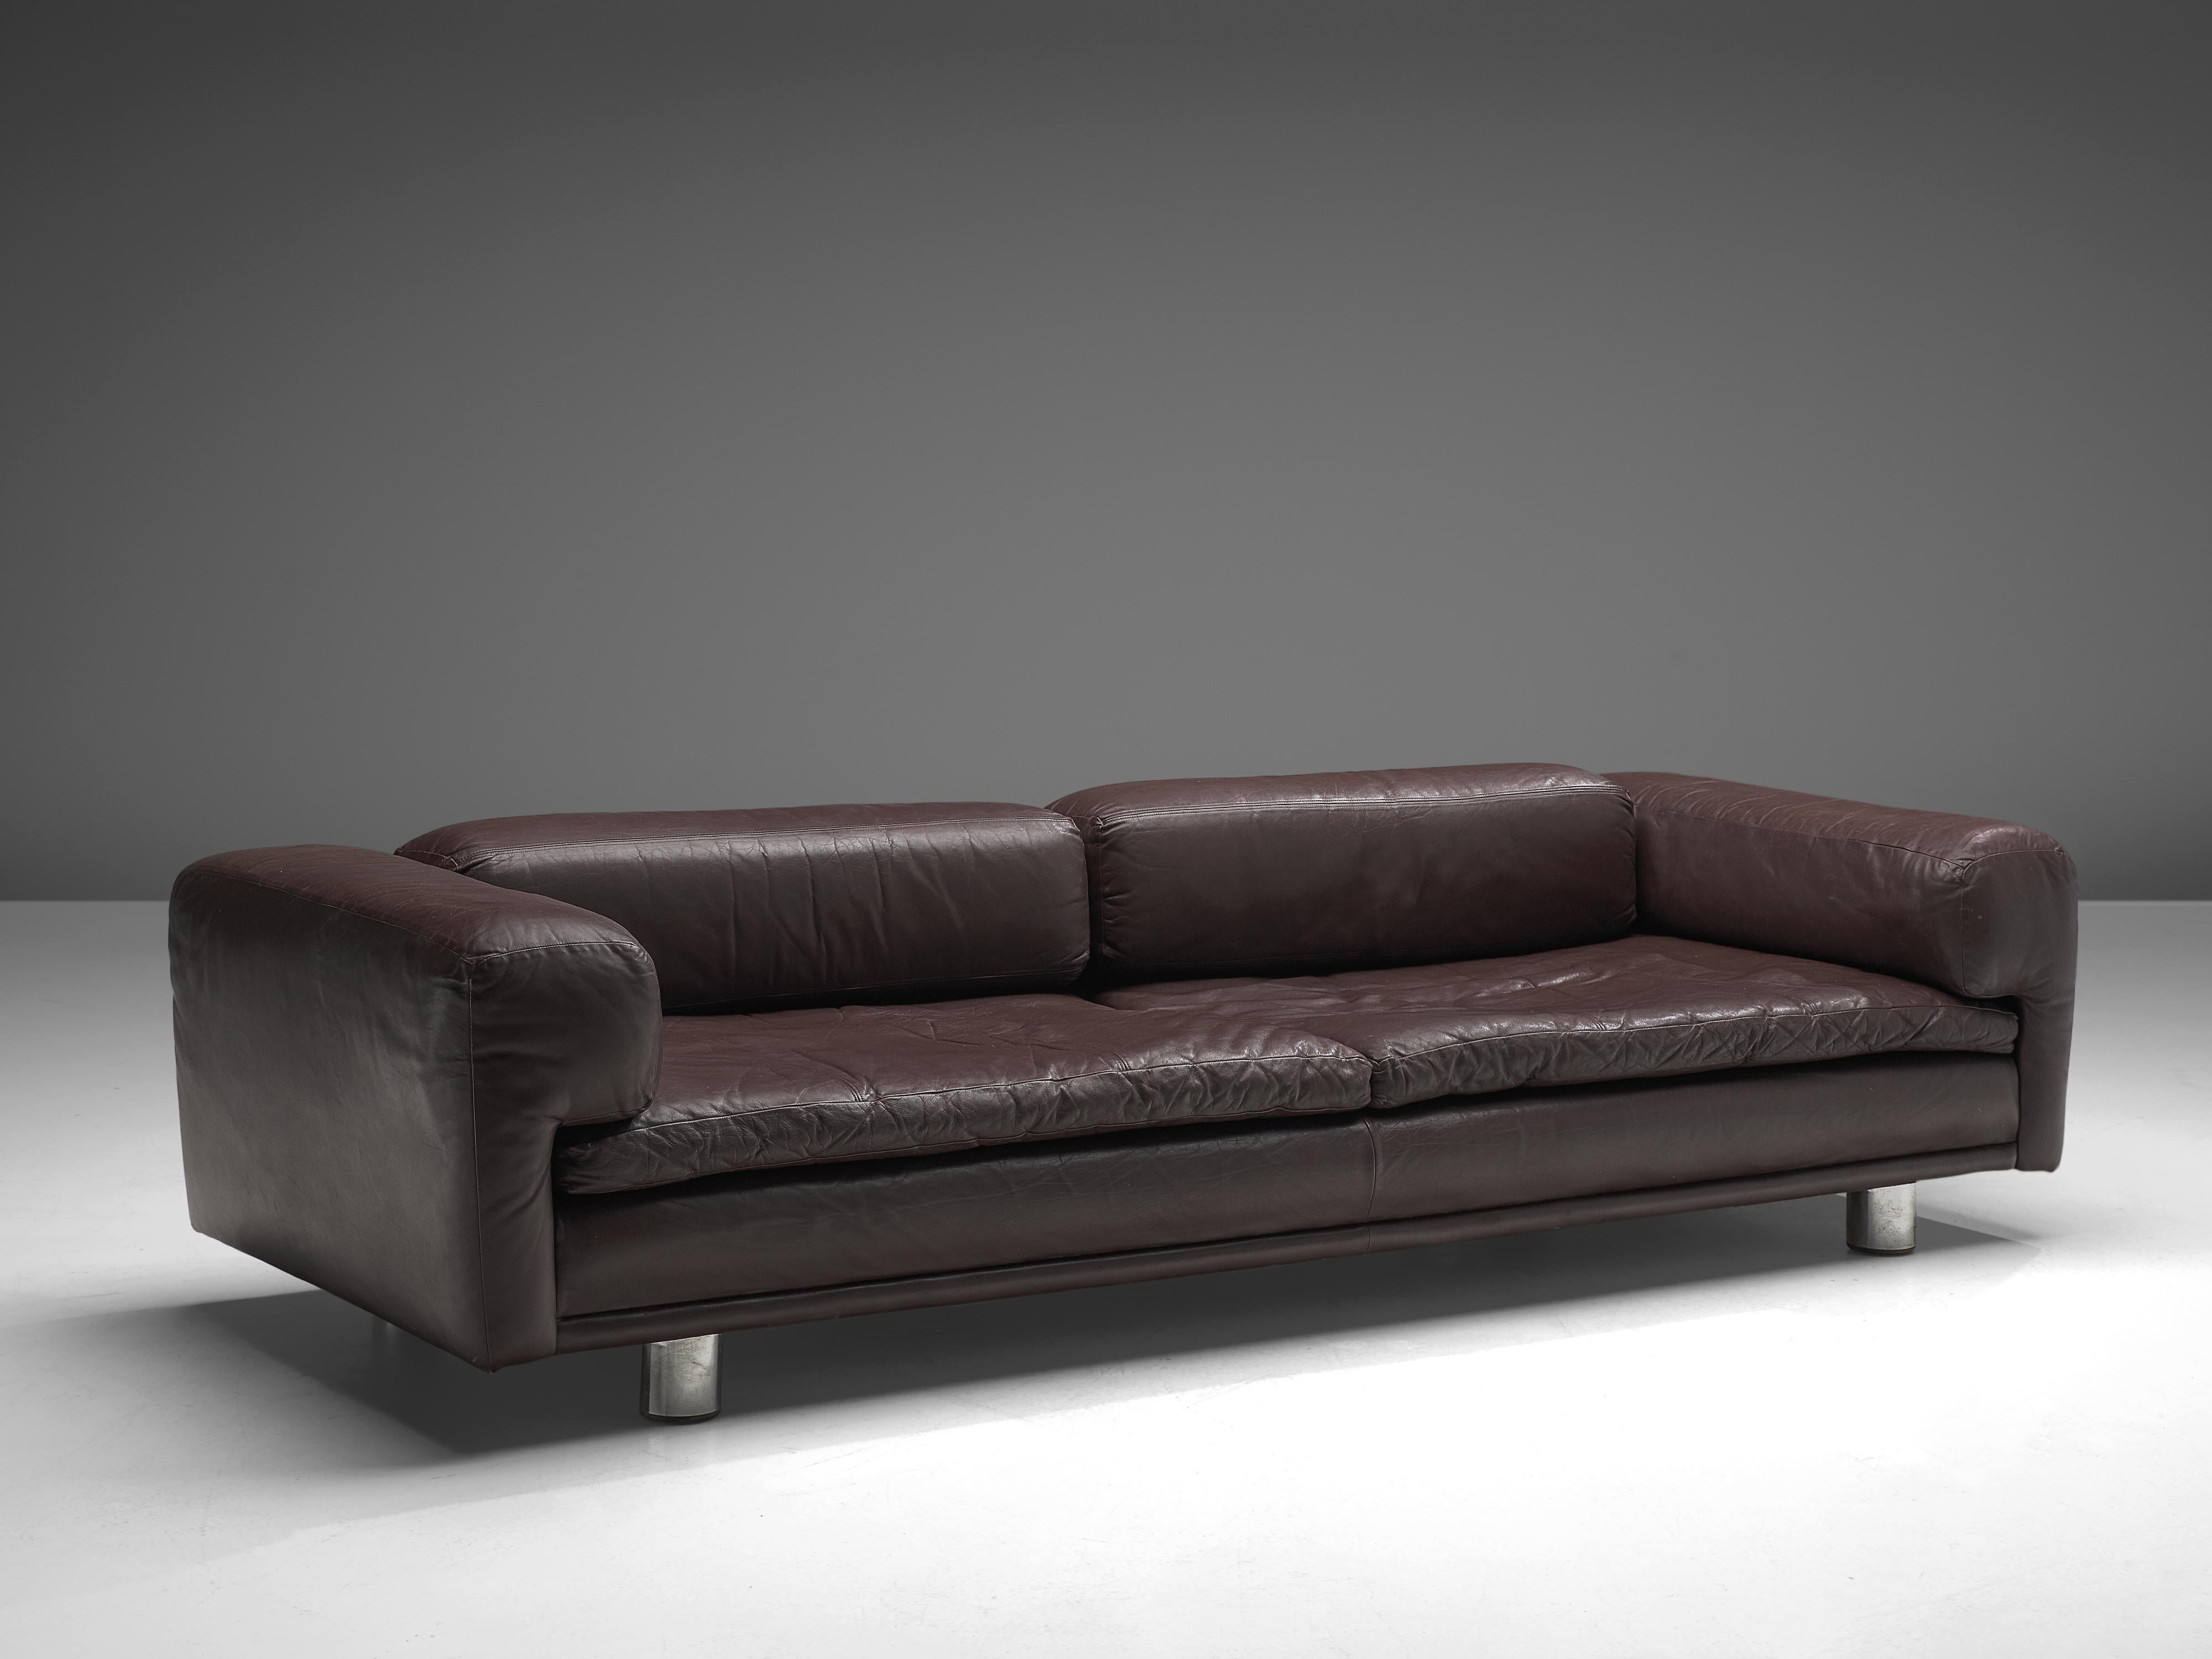 Howard Keith for HK Furniture, 'Diplomat' sofa, brown leather, metal, United Kingdom, 1970s

Grand voluptuous sofa by Howard Keith designed in the 1970s. This sofa with a deep seat is a true delight to sit and relax in. The thick armrests, seat